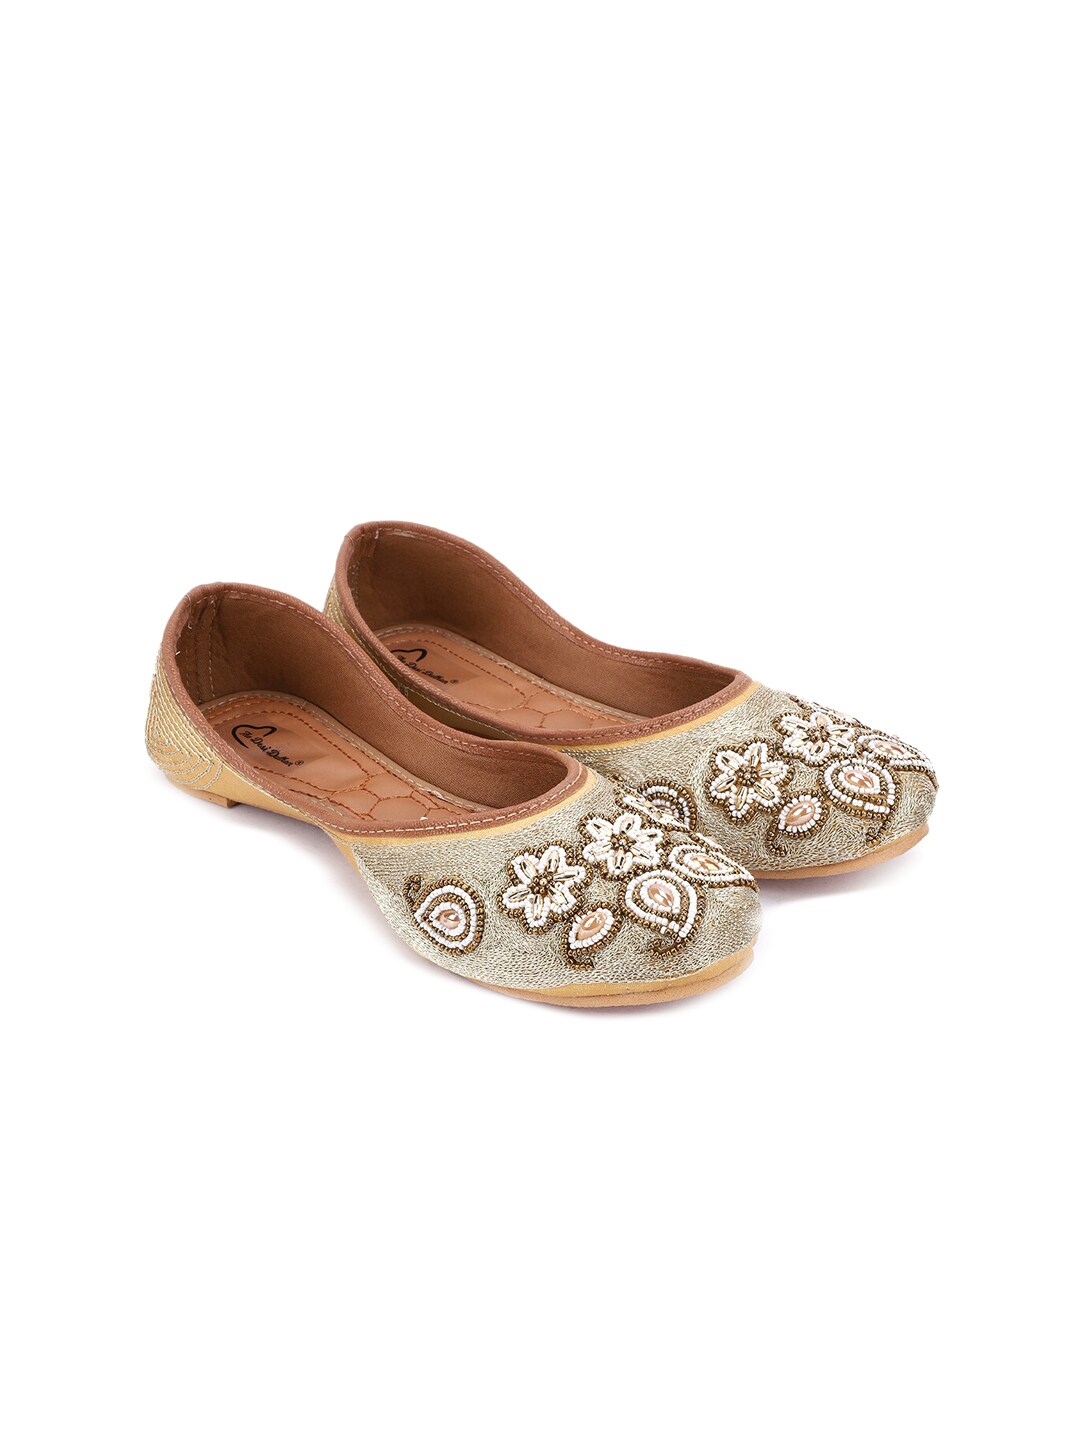 The Desi Dulhan Women Gold-Toned Printed Ballerinas Flats Price in India